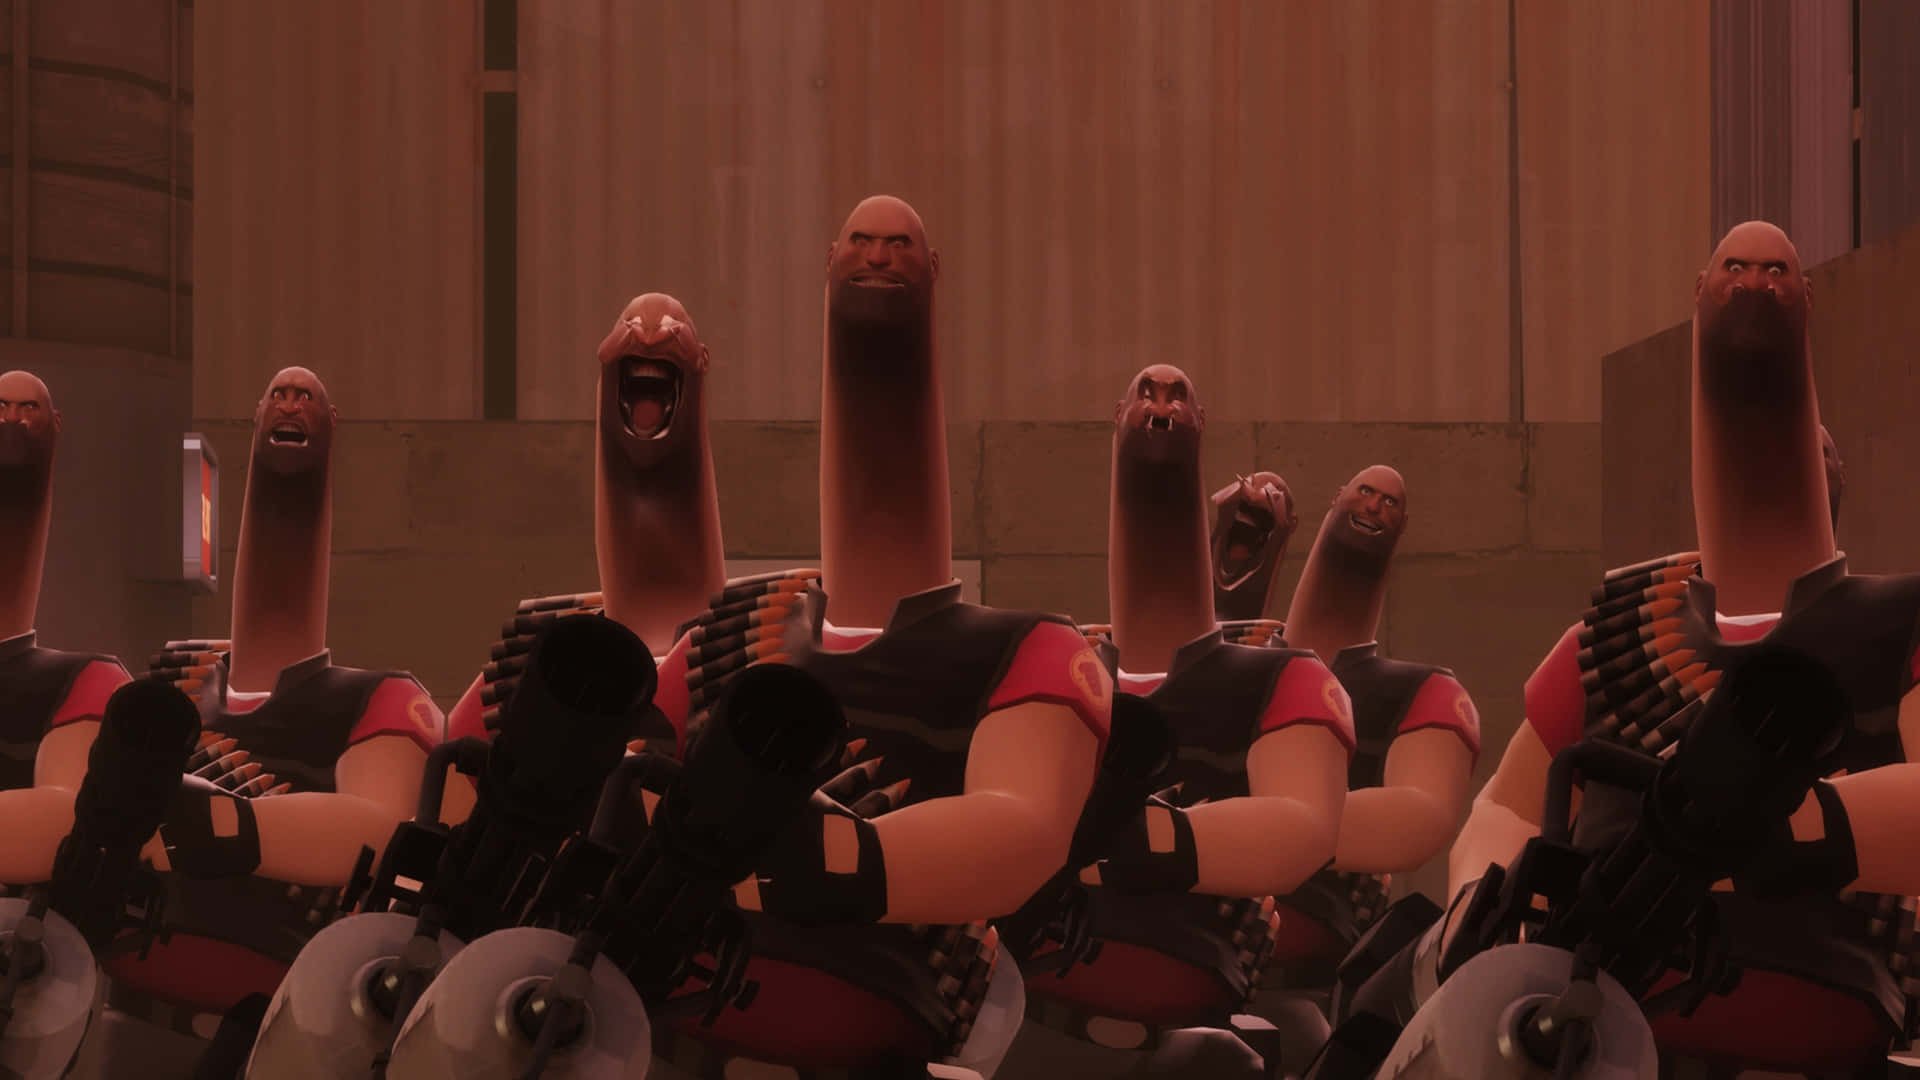 Team Fortress 2 is Still Going Strong